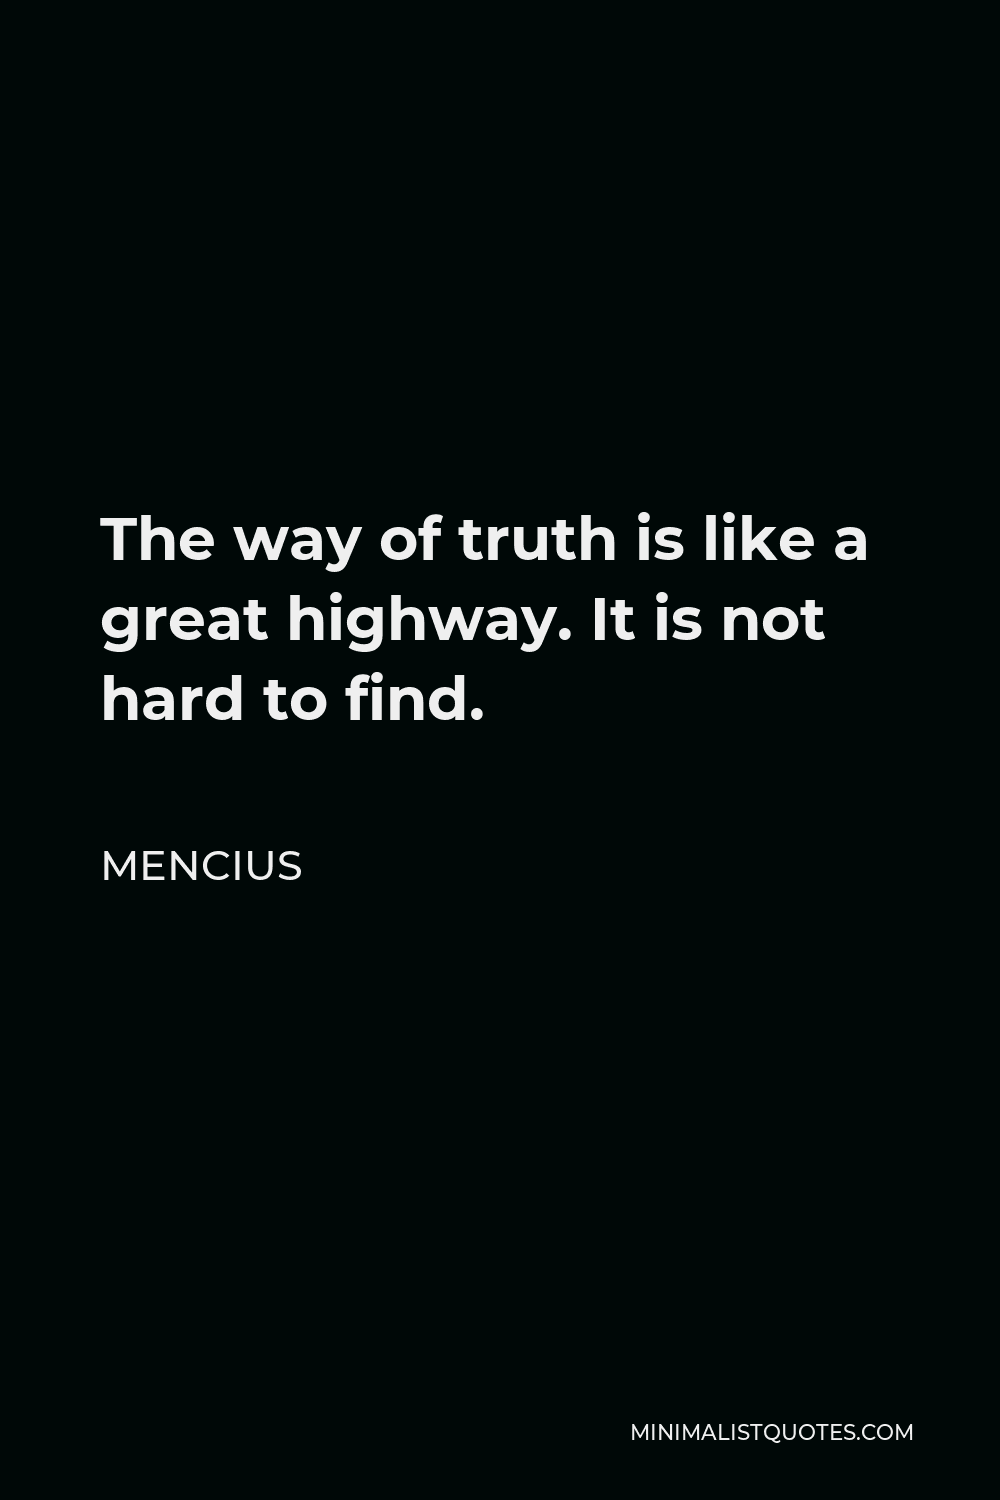 Mencius Quote - The way of truth is like a great highway. It is not hard to find.